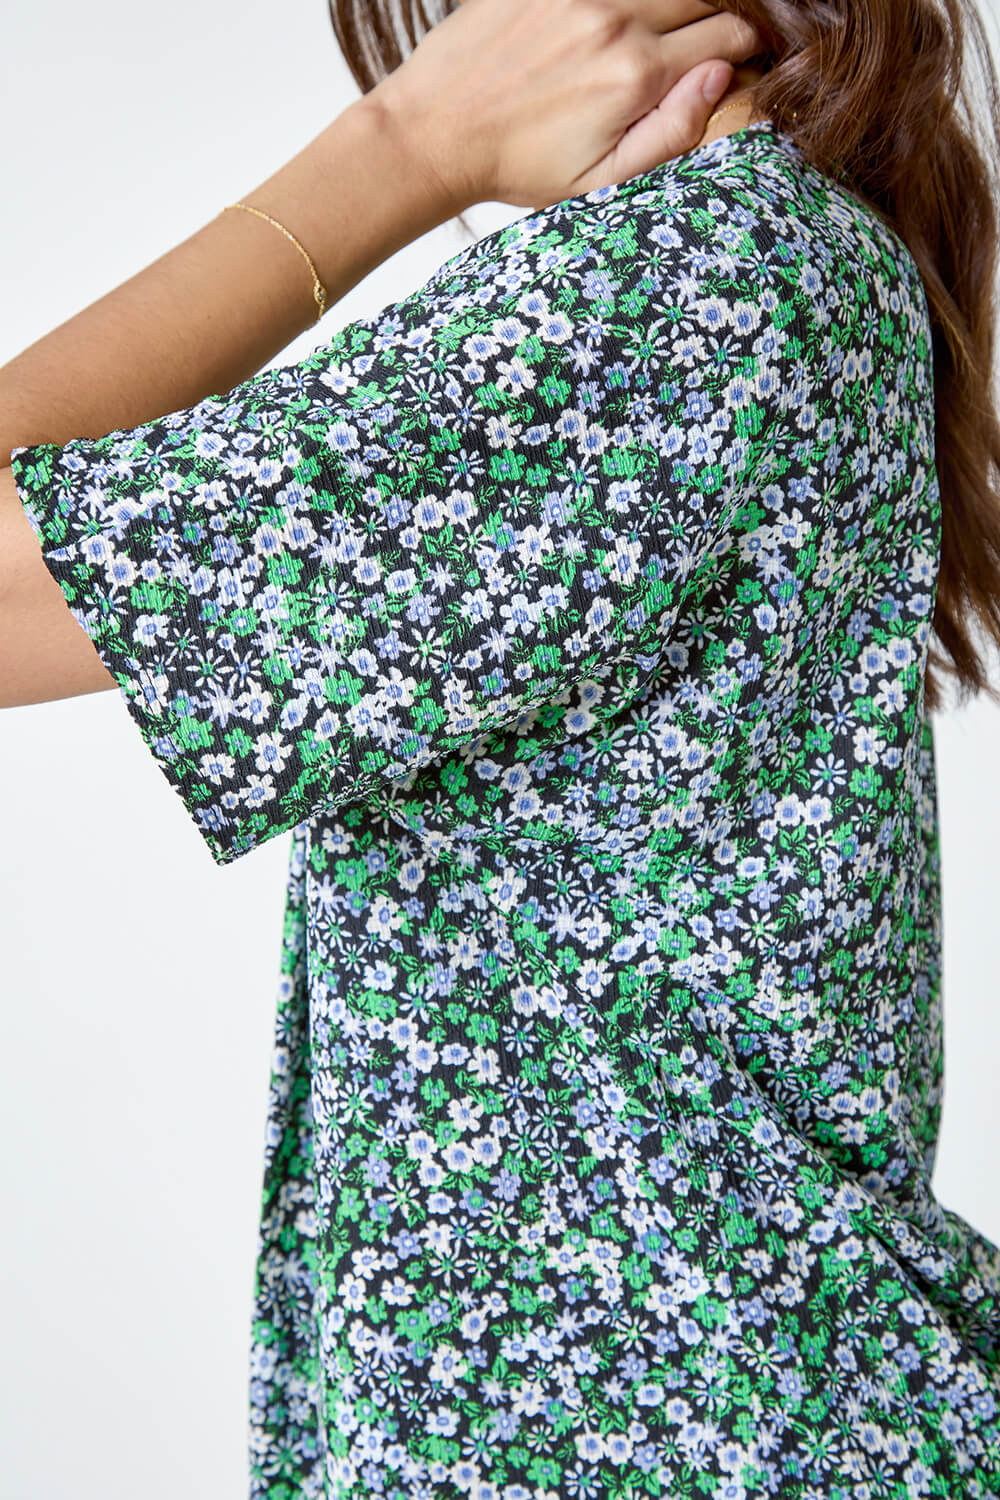 Green Textured Print Stretch Jersey Top, Image 5 of 5